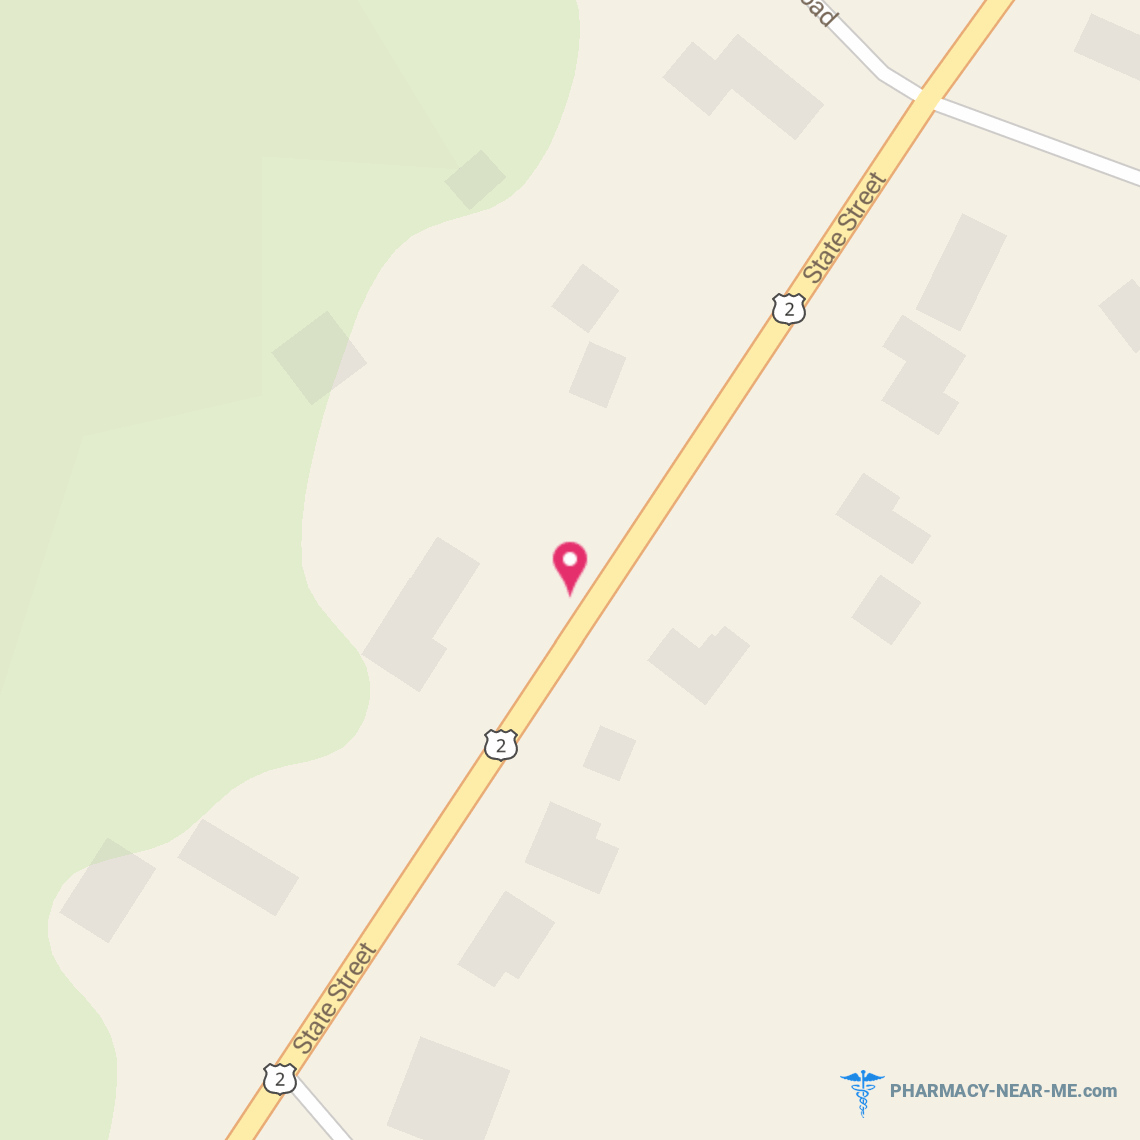 COMMUNITY PHARMACY-HERMON - Pharmacy Hours, Phone, Reviews & Information: 2402 Route 2, Hermon, Maine 04401, United States